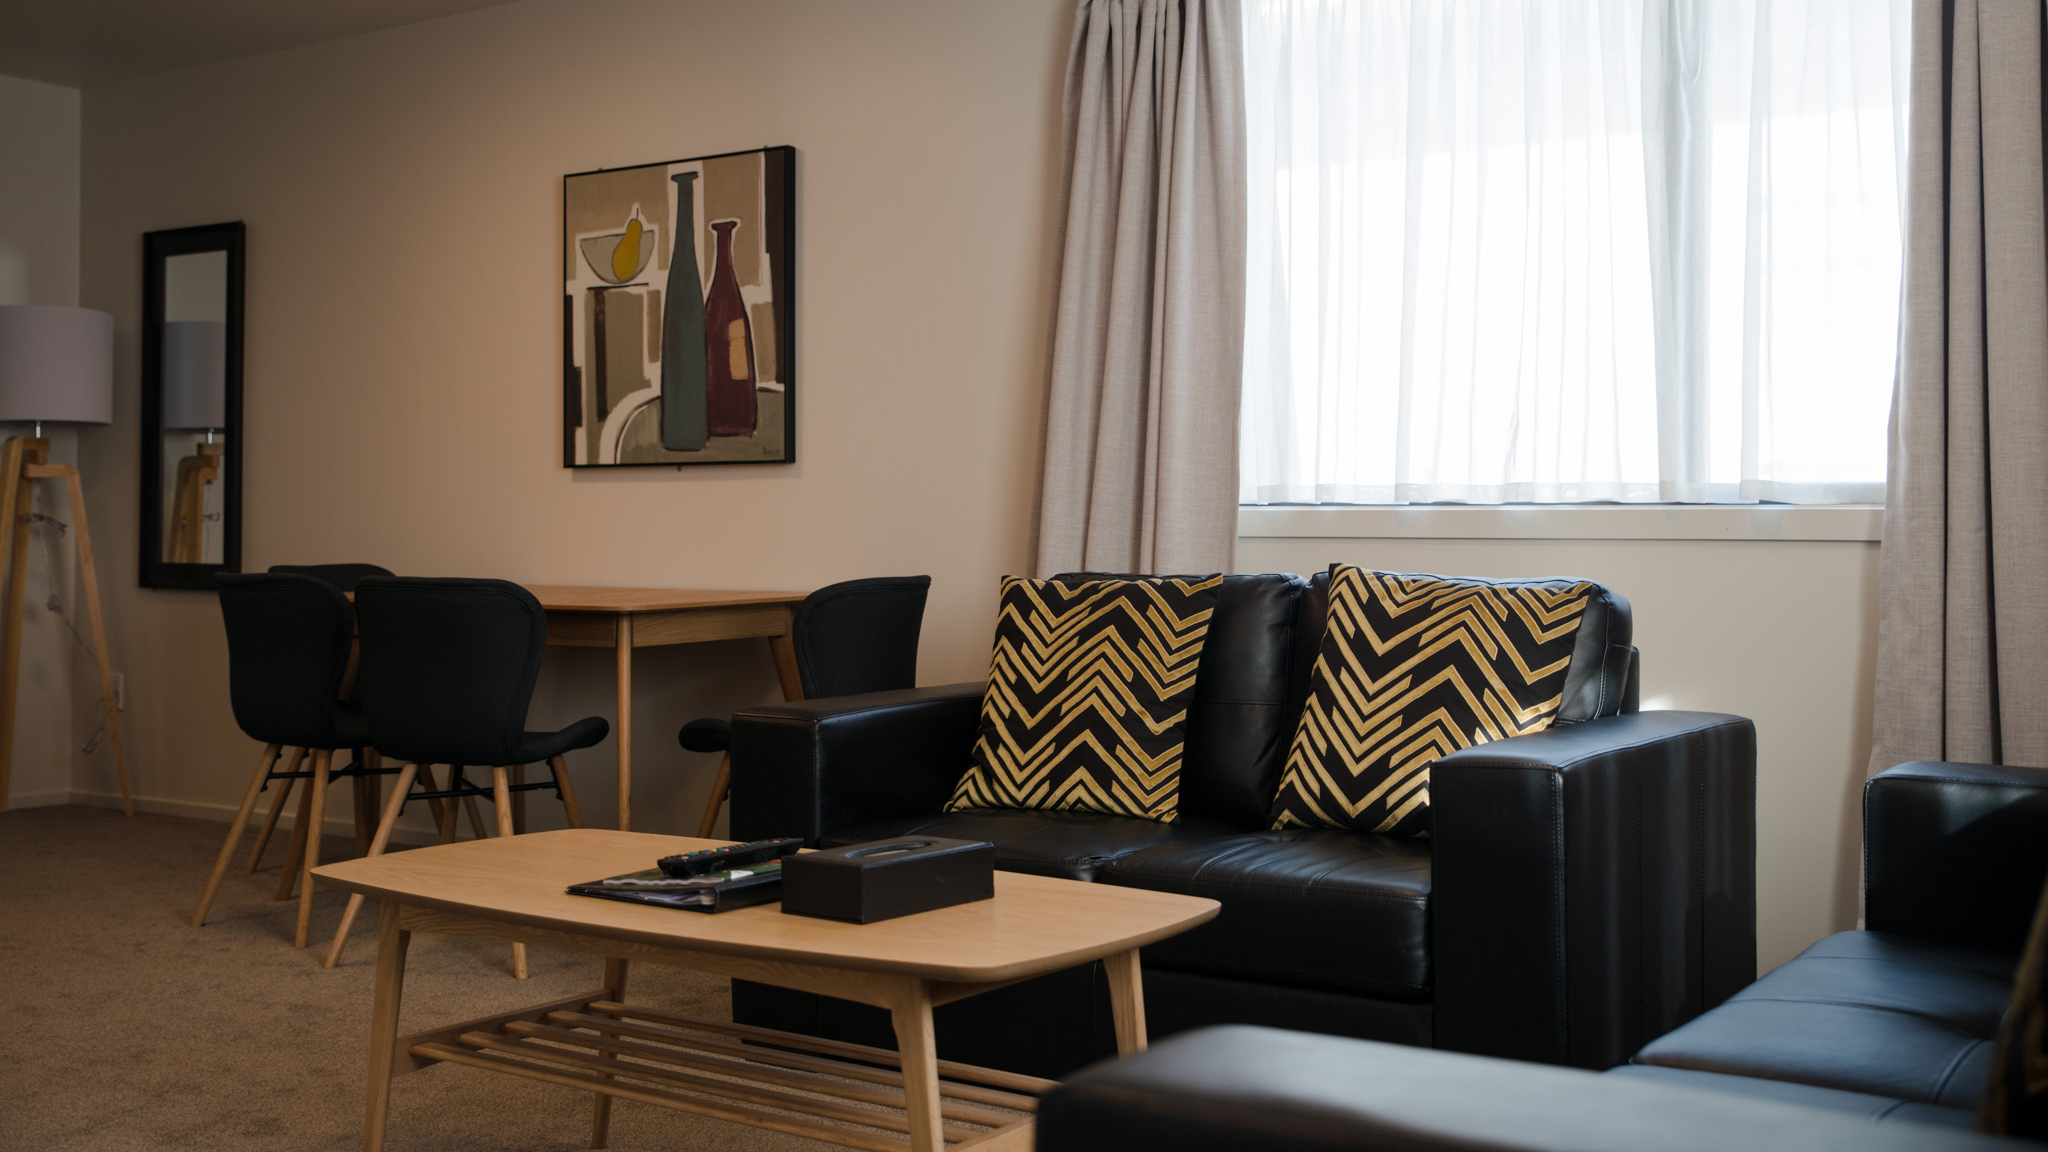 Dunedin interior design company completes a fresh new look for a local hotel thumbnail